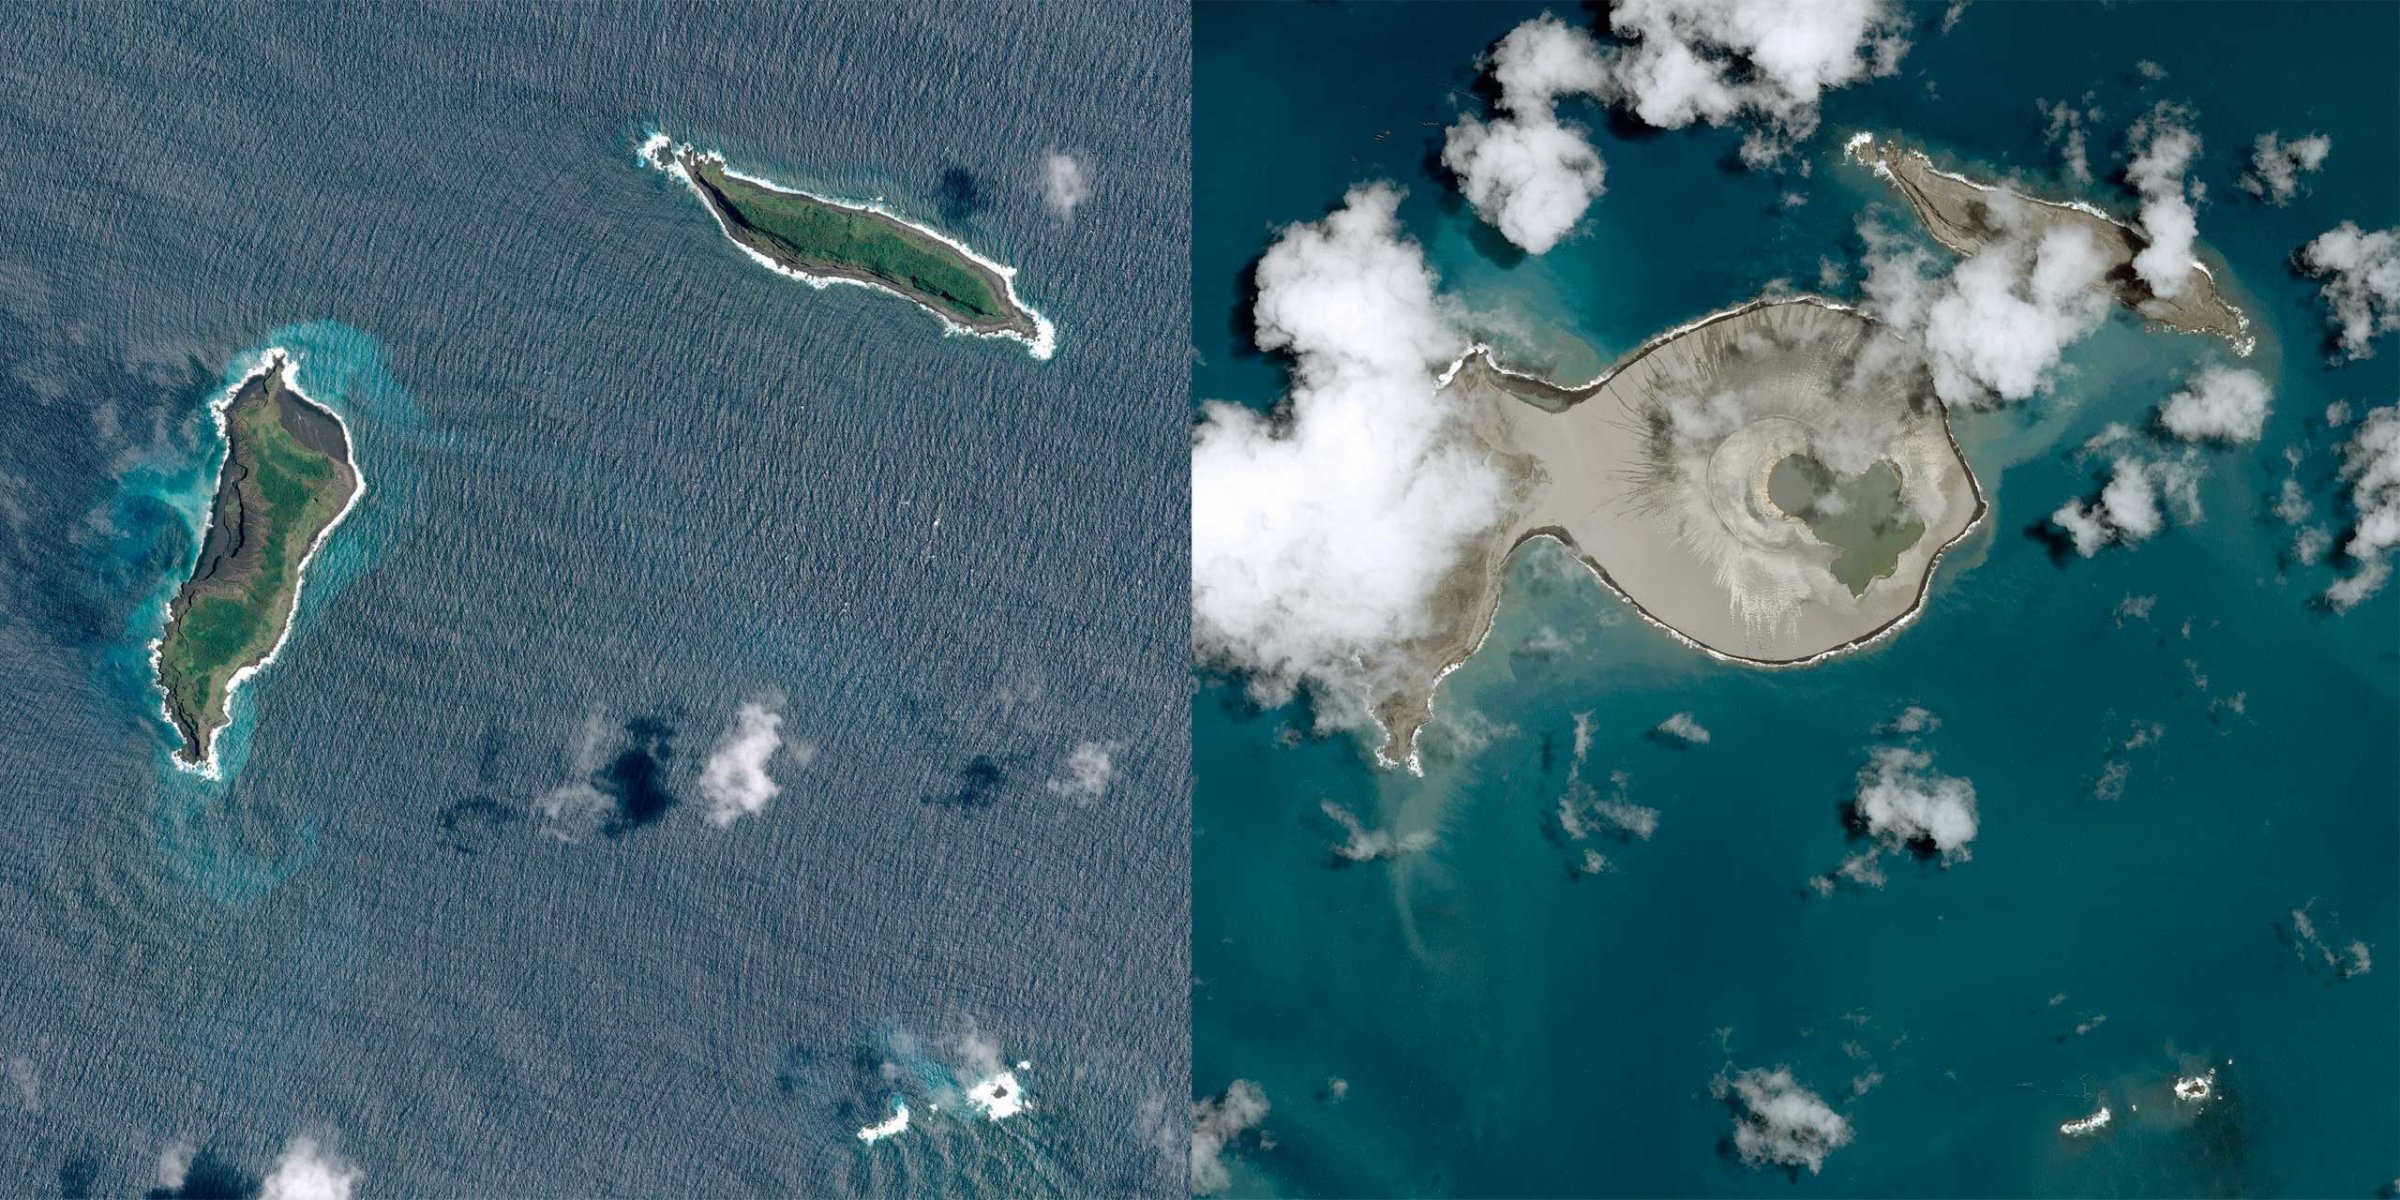 This diptych shows before and after satellite views of a new island, created when the island on the left fused with a volcanic crater, off the coast of Tonga. The pre-eruption satellite view before the island on the left became fused with the volcanic crater created by Hunga Tonga.